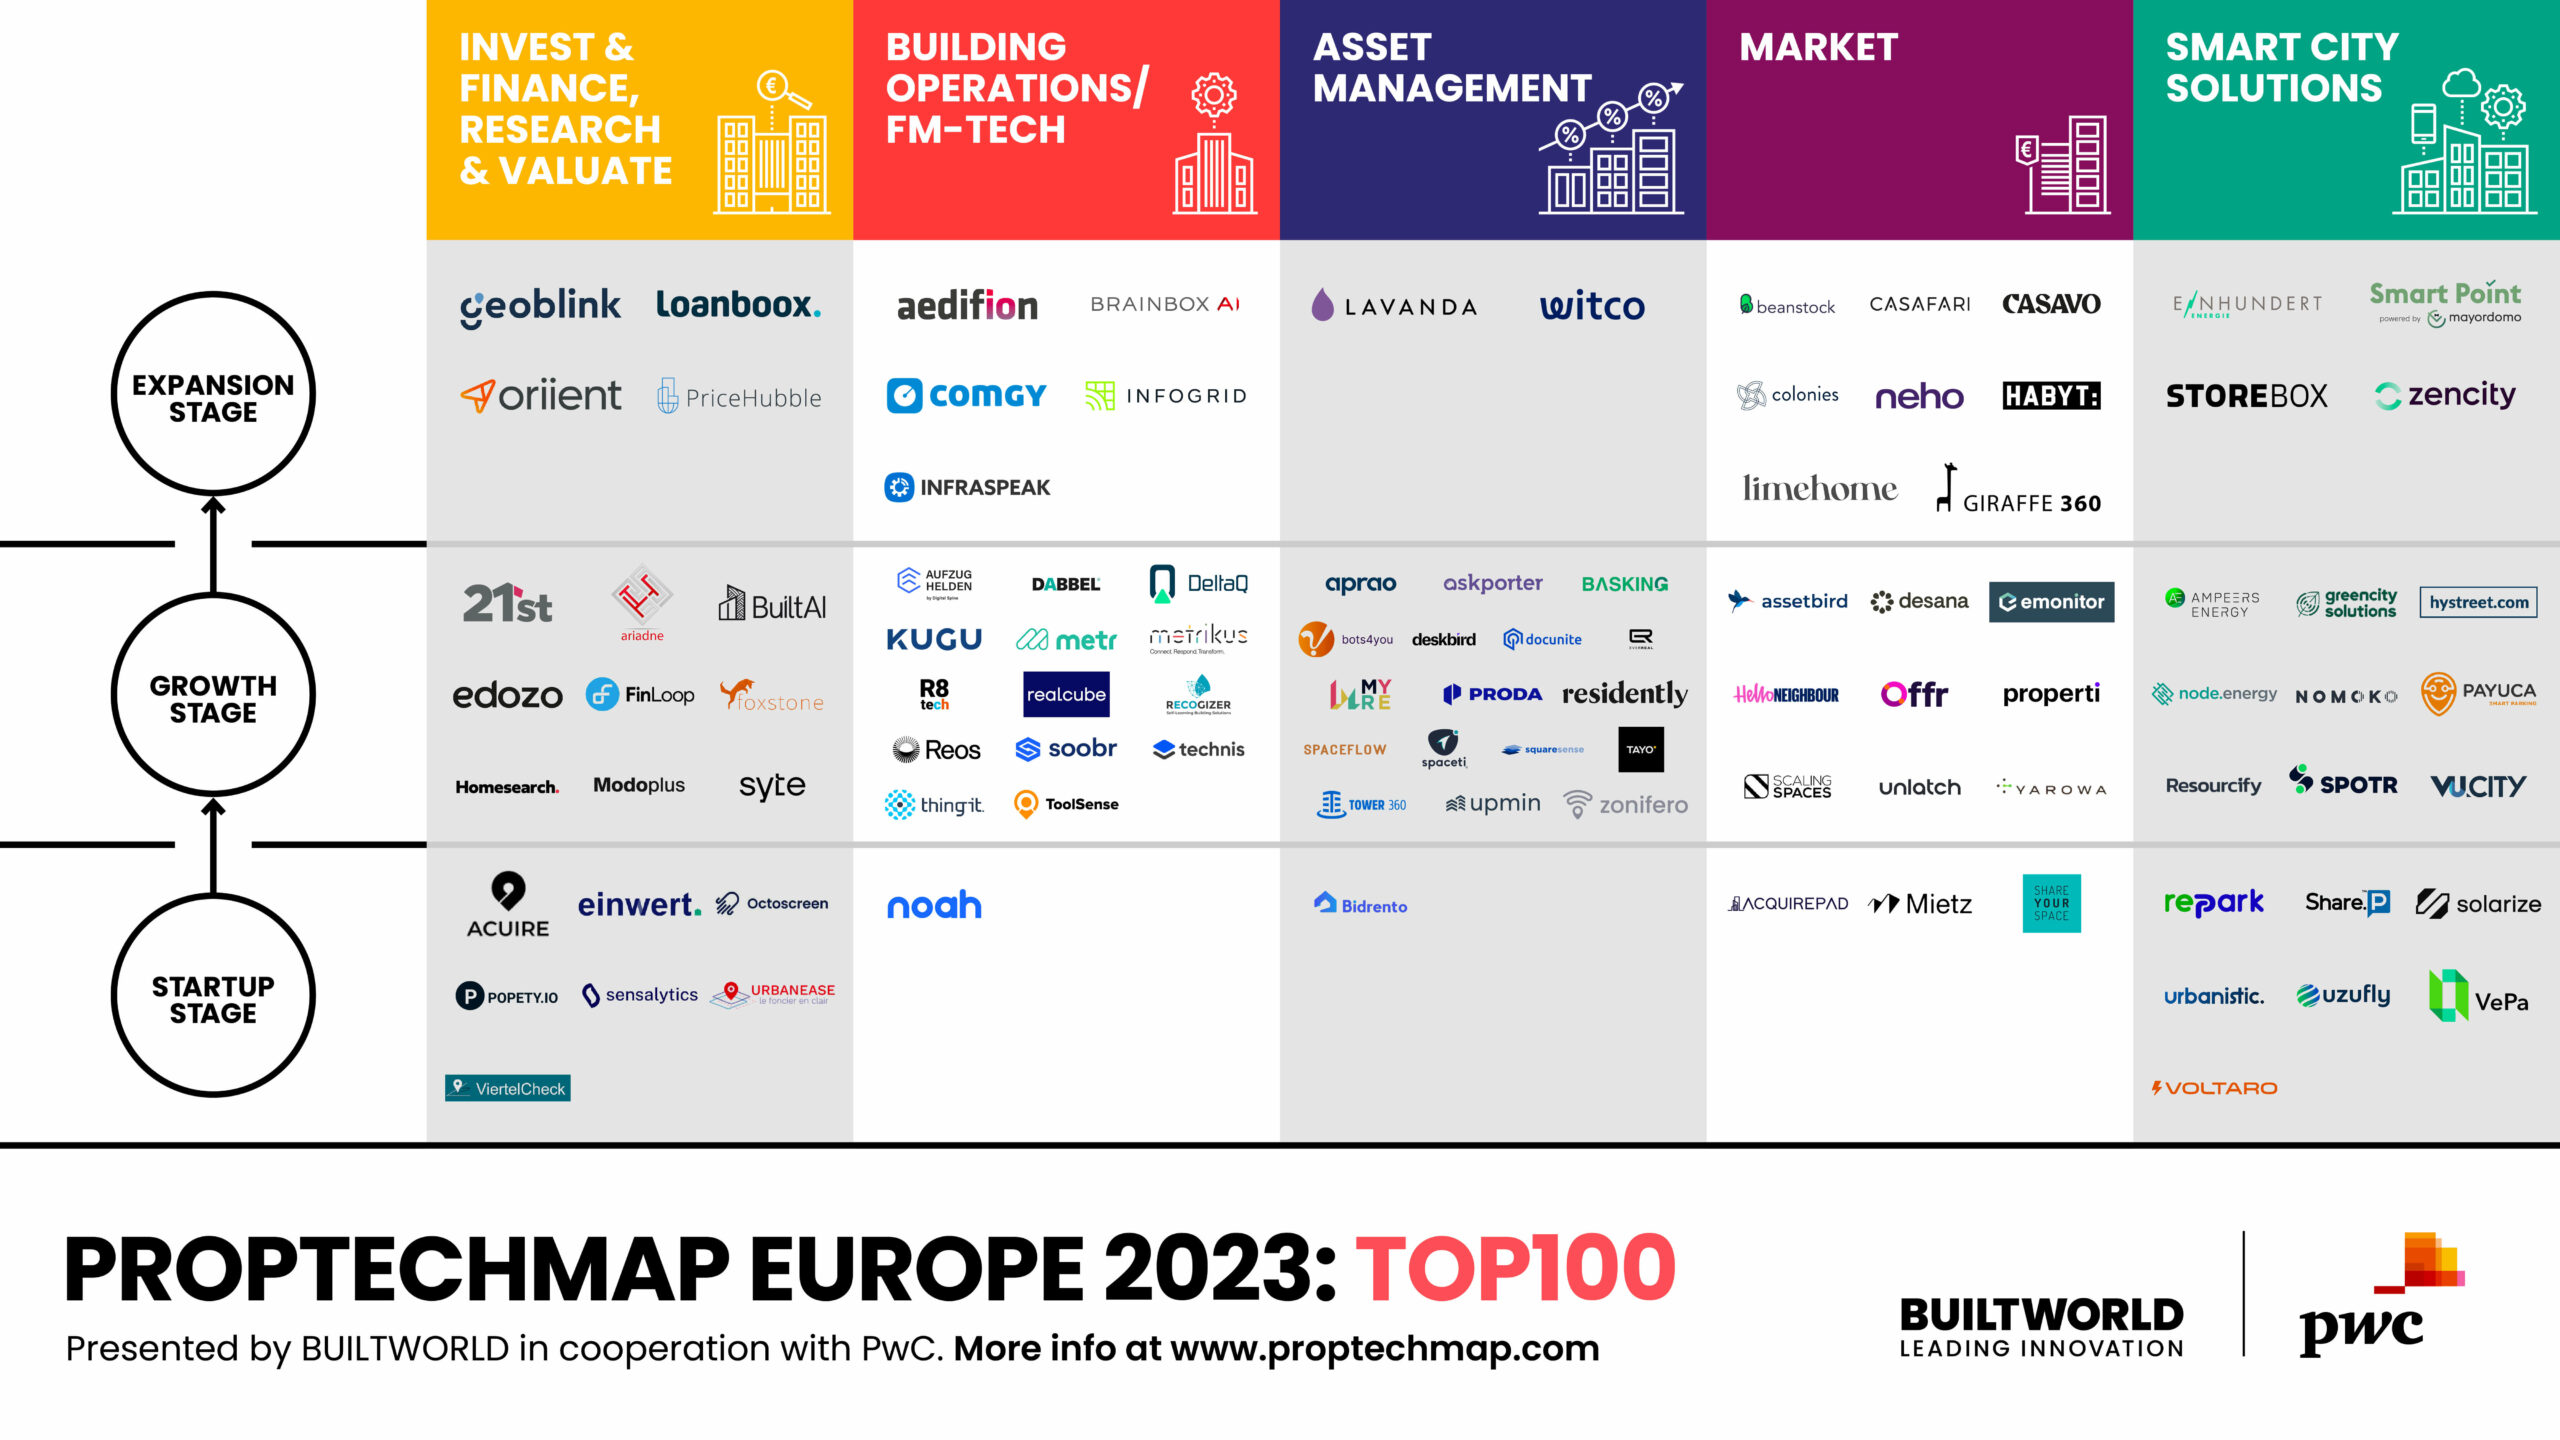 Proptechmap Europe 2023